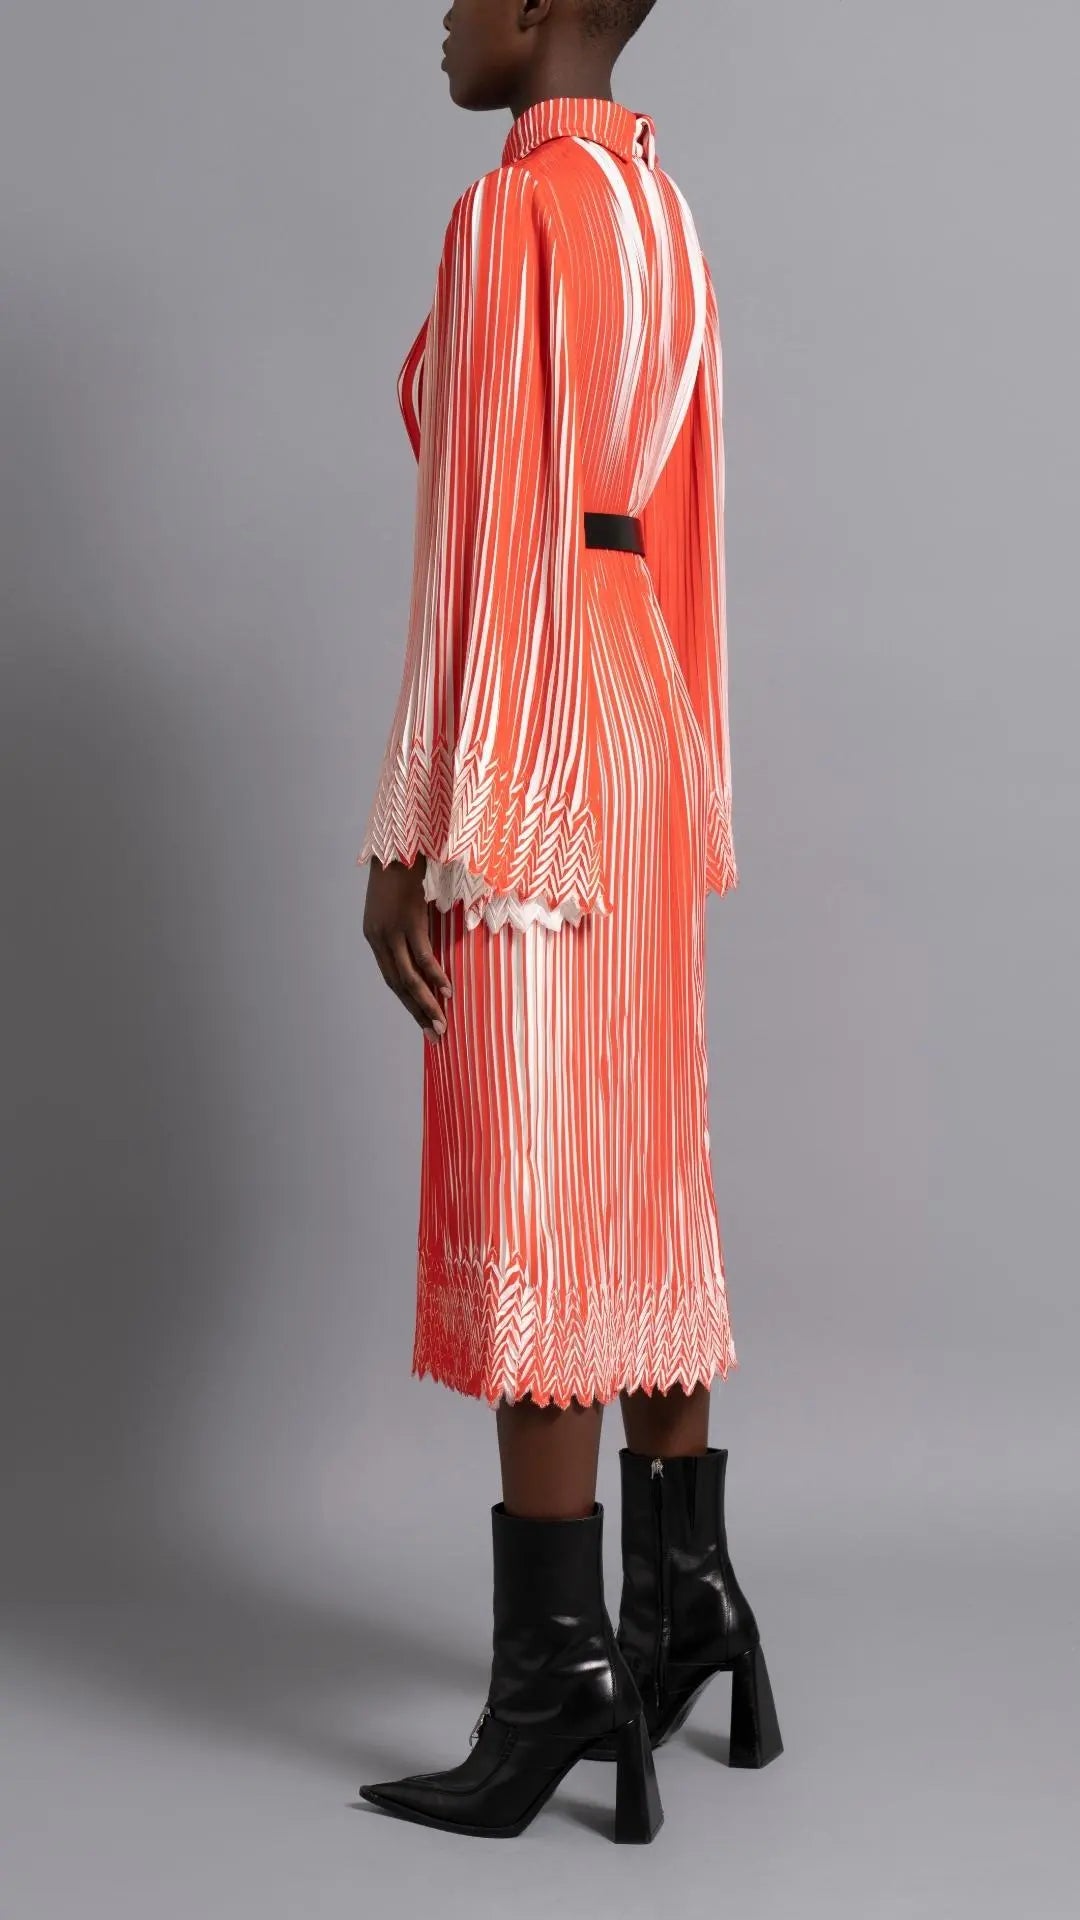 Thebe Magugu Chevron Pleated Dress. Stunning tomato red and white pleated dress with a collar, fitted waist and double chevron hem at the sleeves. It features a hidden zipper in the back. Shown on model facing to the side and back.